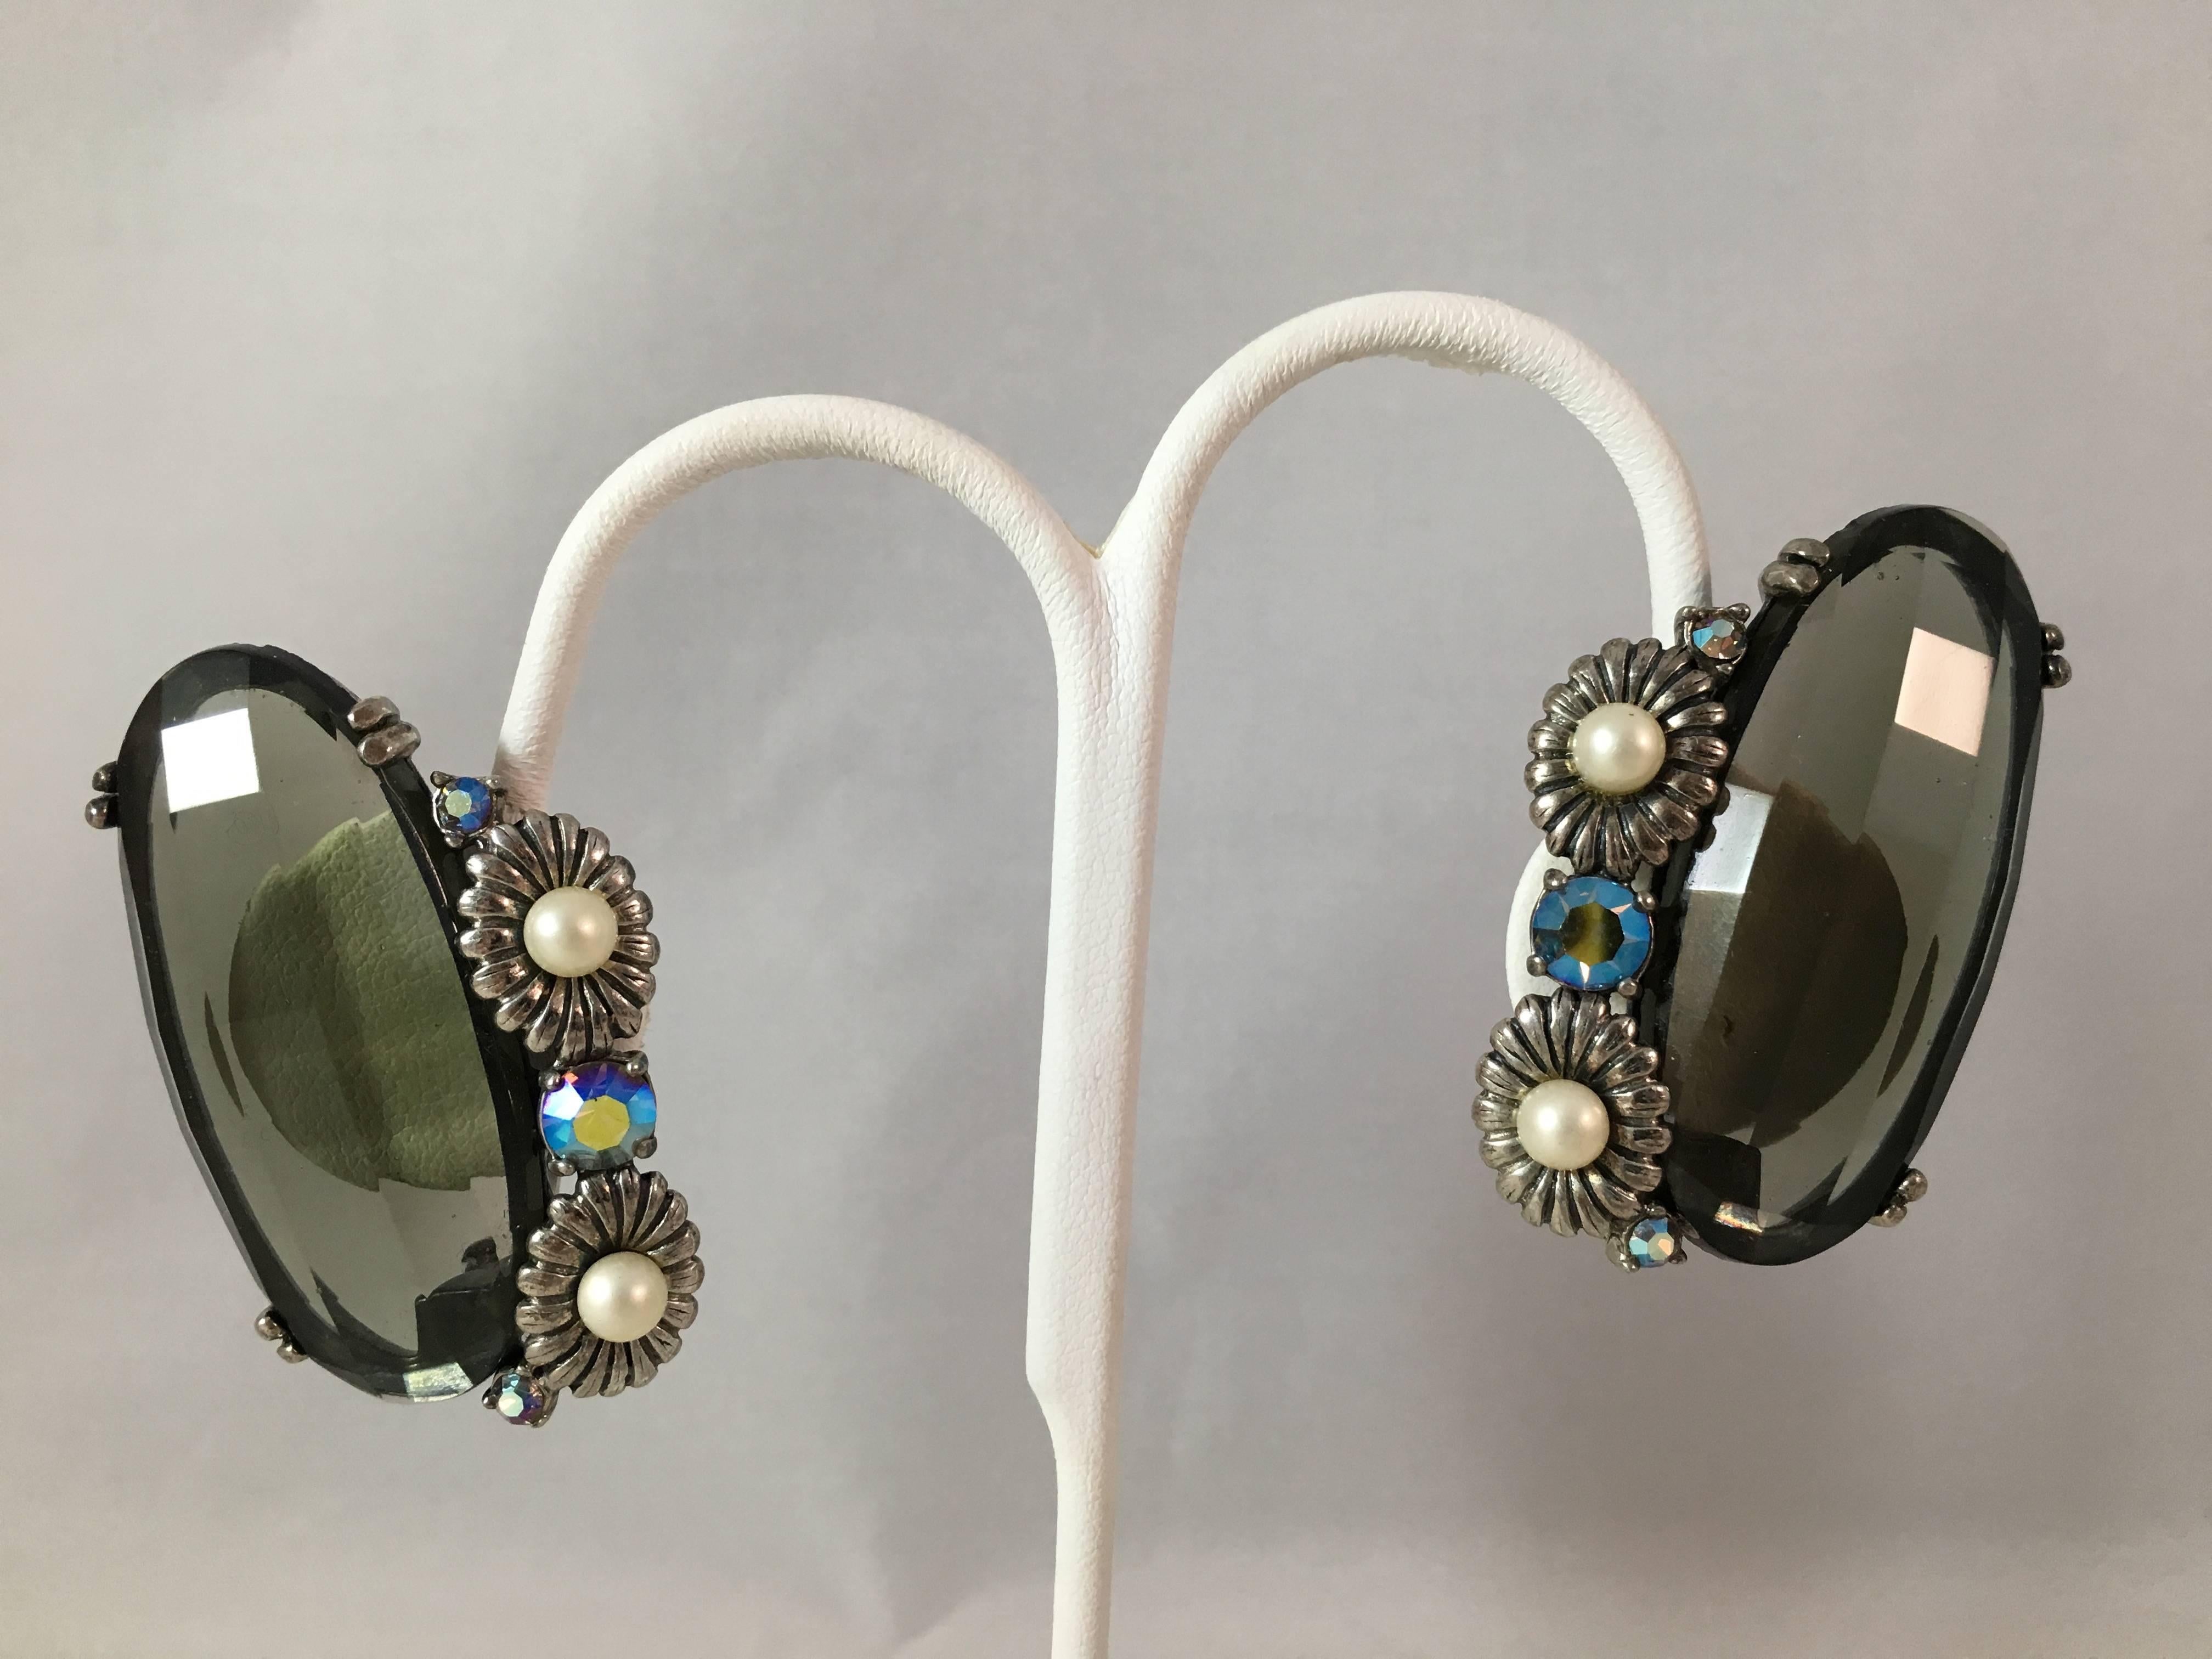 These are huge Schiaparelli clip-on earrings from the 1940s. Each earring is  made up of a large faceted grey topaz glass stone set with silver-tone metal flowers with faux pearl centers and aurora borealis stones. The earrings are set in a